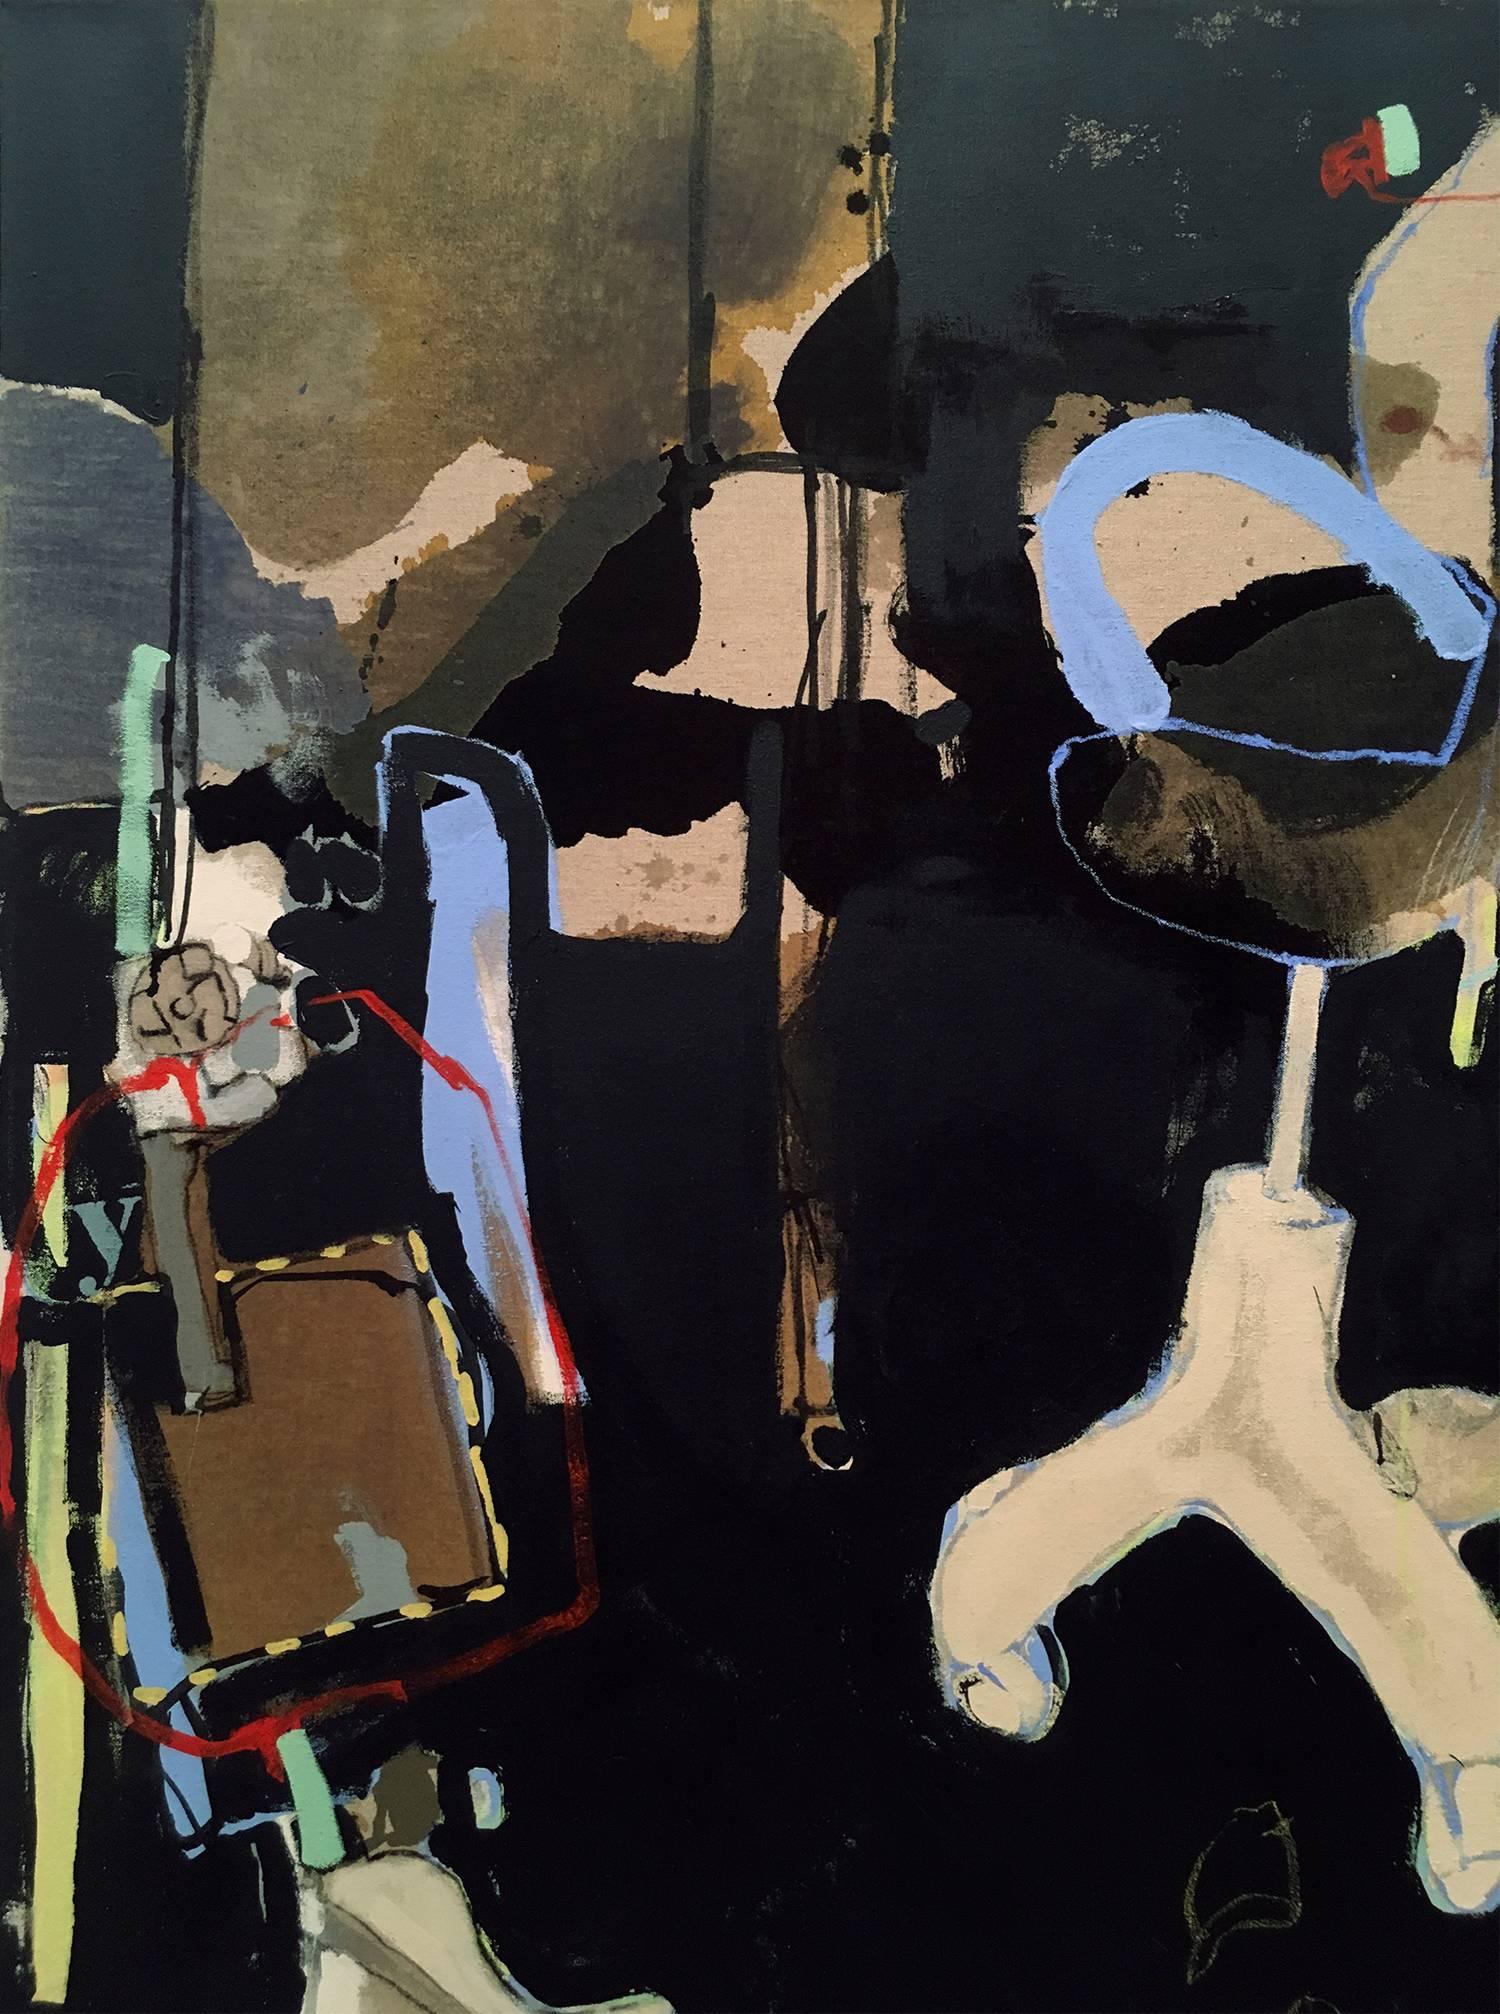 This mixed-media work by Anna Schuleit Haber includes acrylic, ink, and oil pastel (but no oil paint) on linen. The Black Studio invites the viewer to take a closer look in order to find an office chair, human feet inches below a robotic figure,